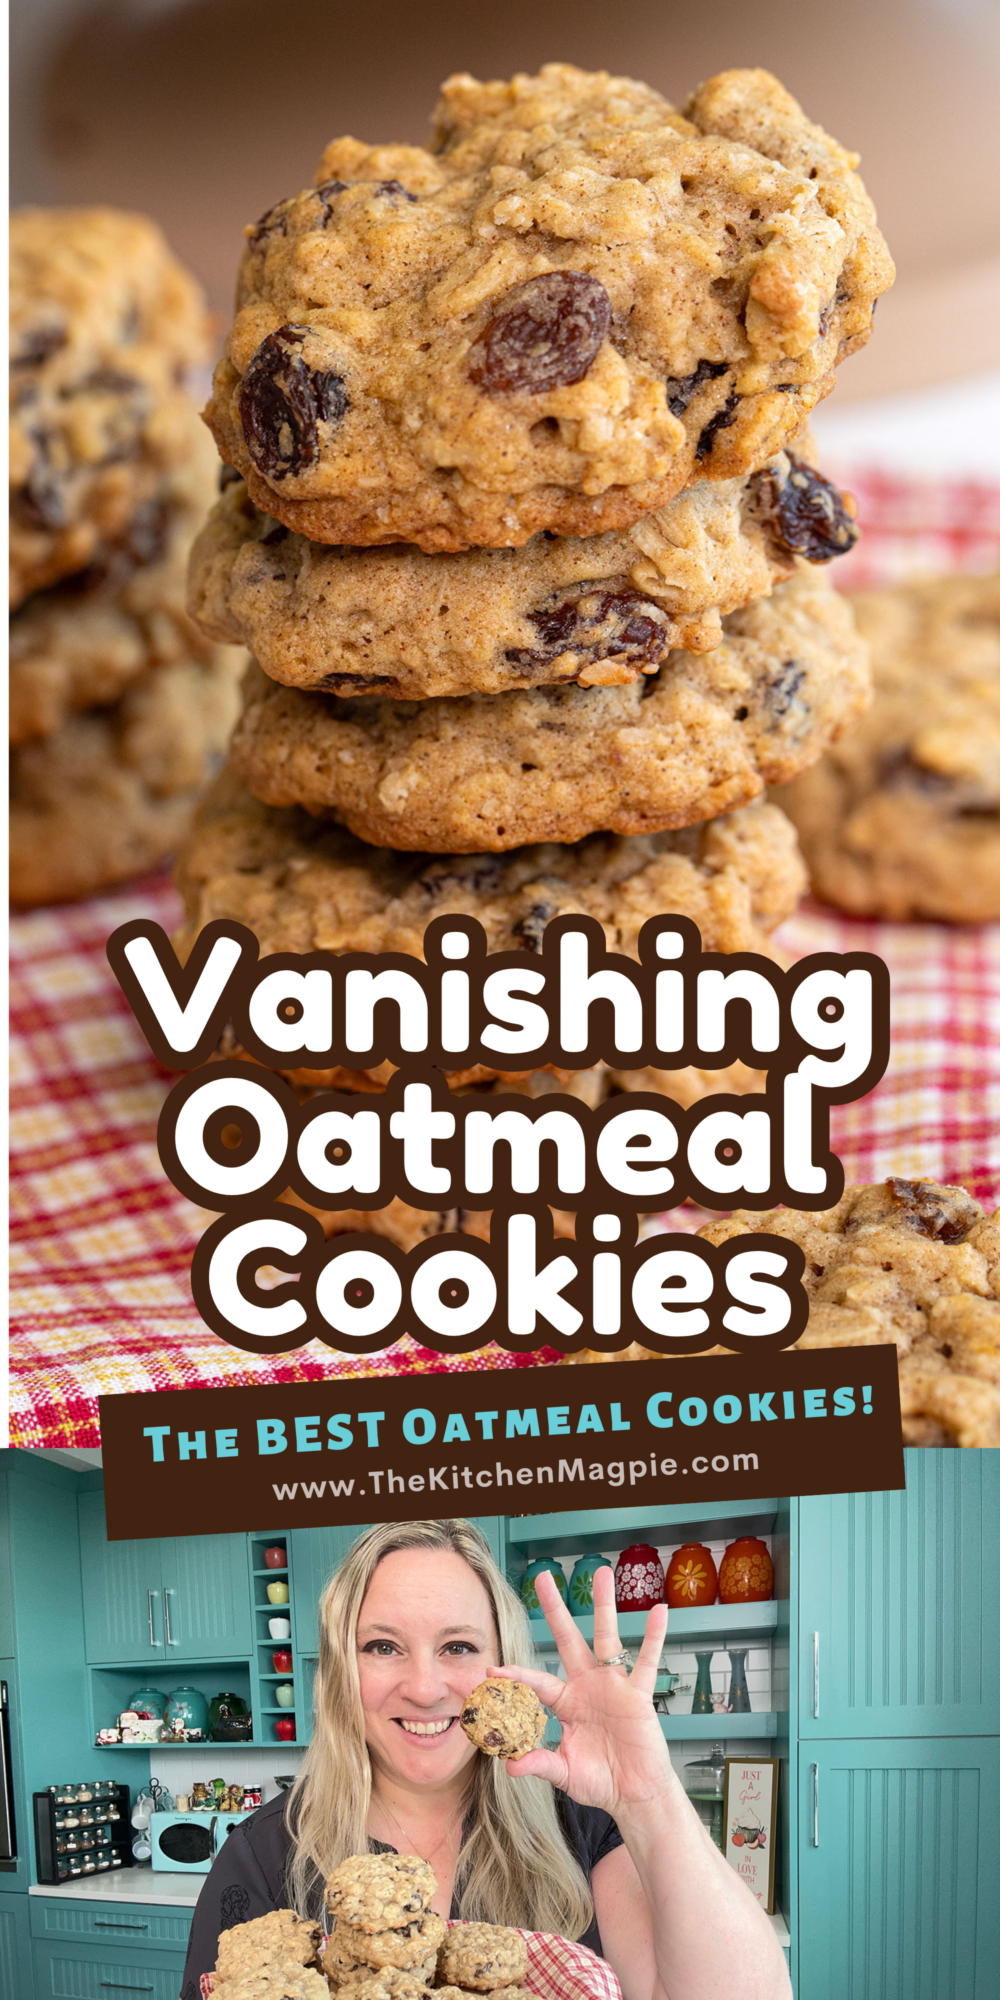 The best oatmeal raisin cookies recipe ever! This is right off the package of Quaker Oats, BUT with my Dad's additions, these have become the BEST version of these cookies!